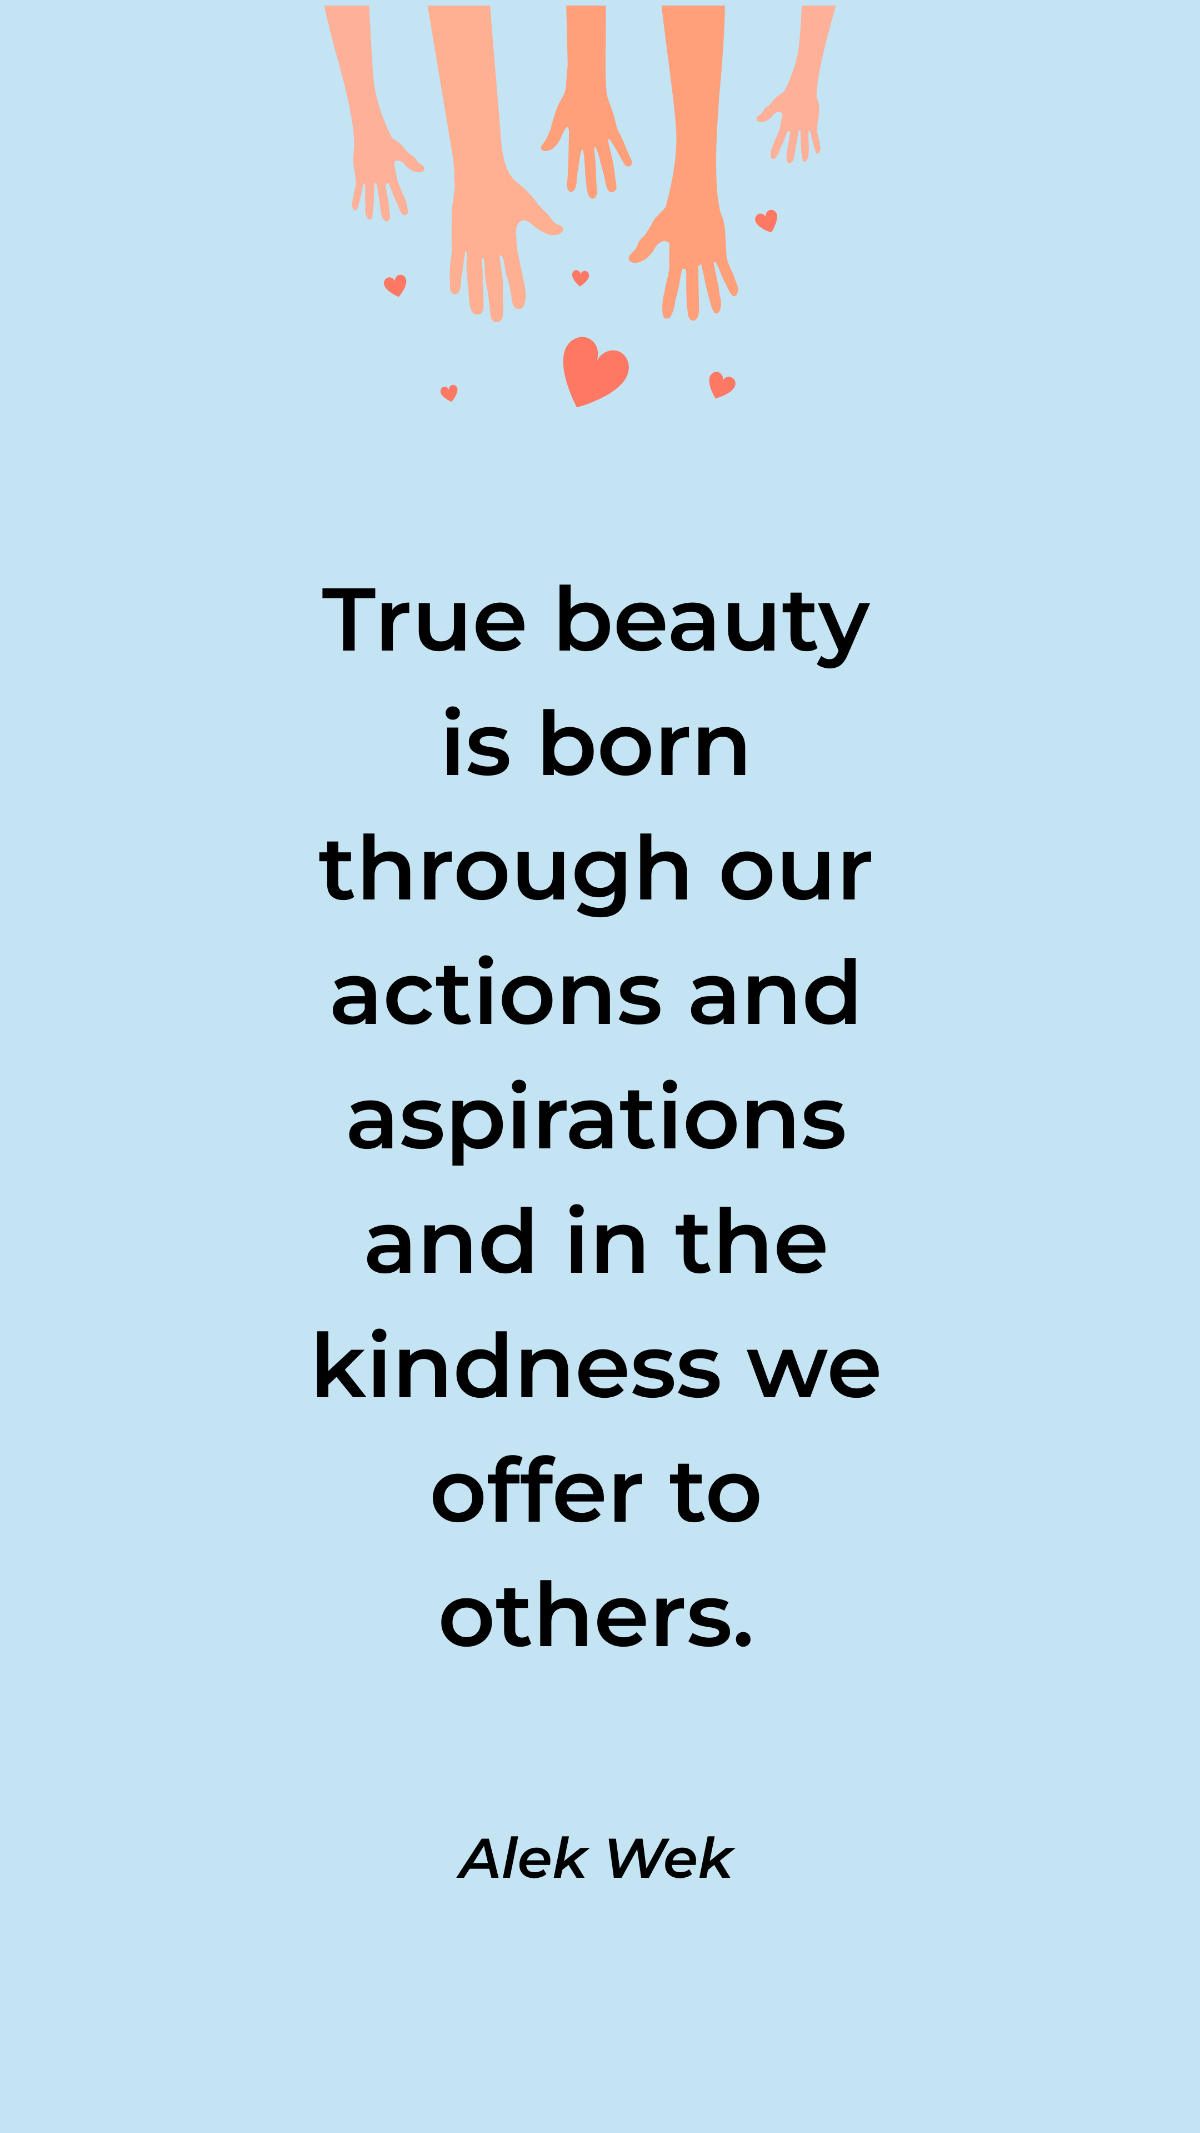 Alek Wek - True beauty is born through our actions and aspirations and in the kindness we offer to others. Template